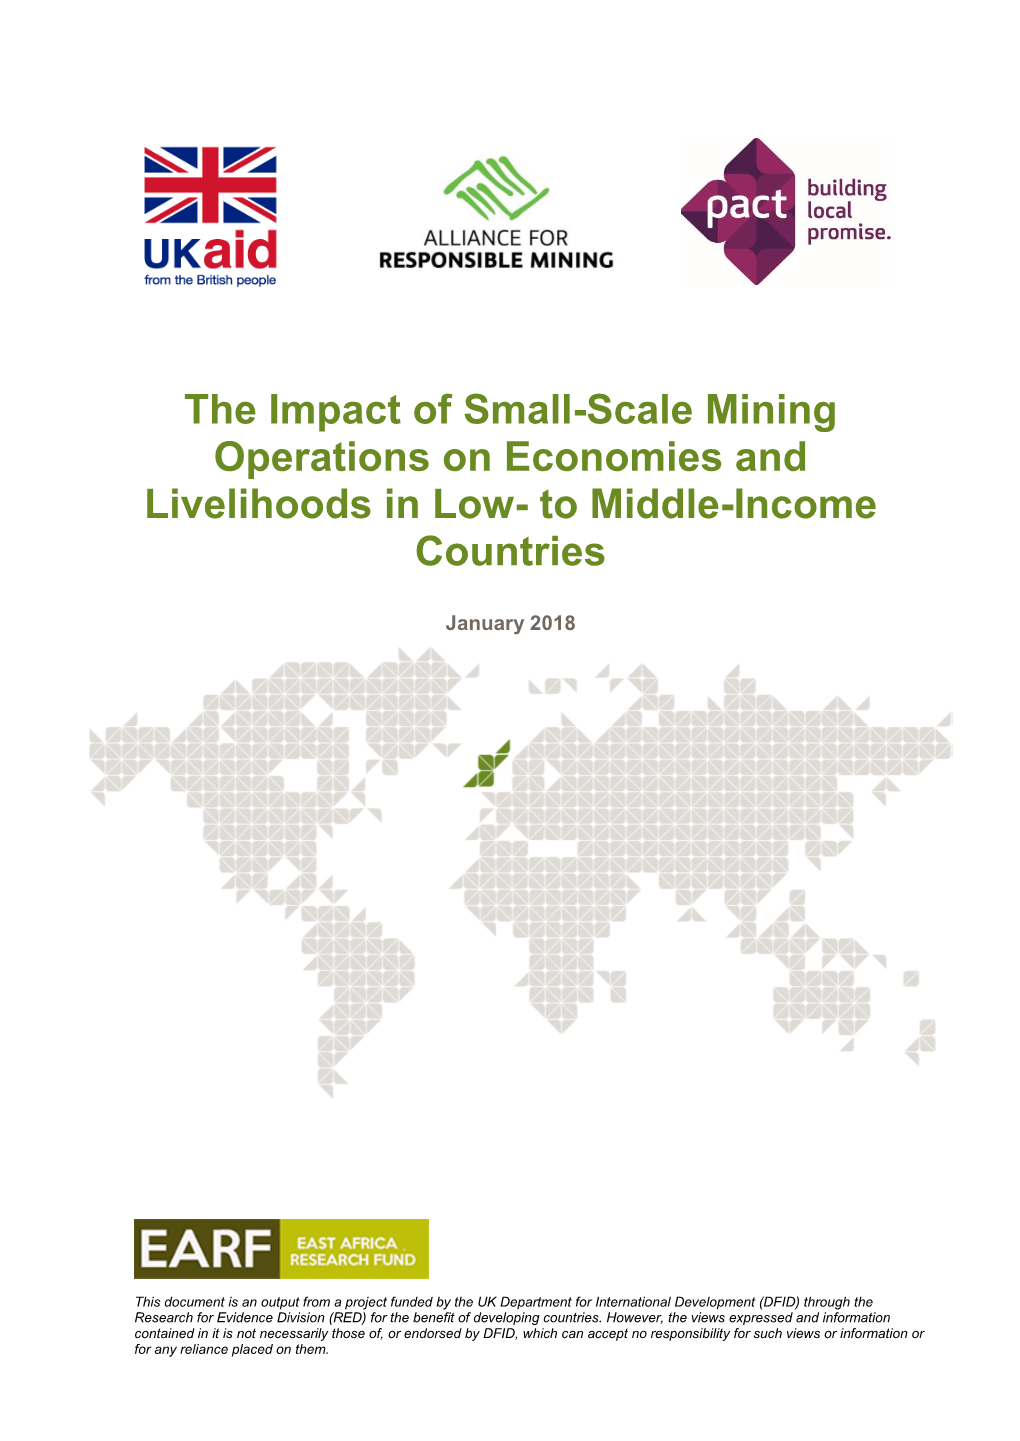 The Impact of Small-Scale Mining Operations on Economies and Livelihoods in Low- to Middle-Income Countries